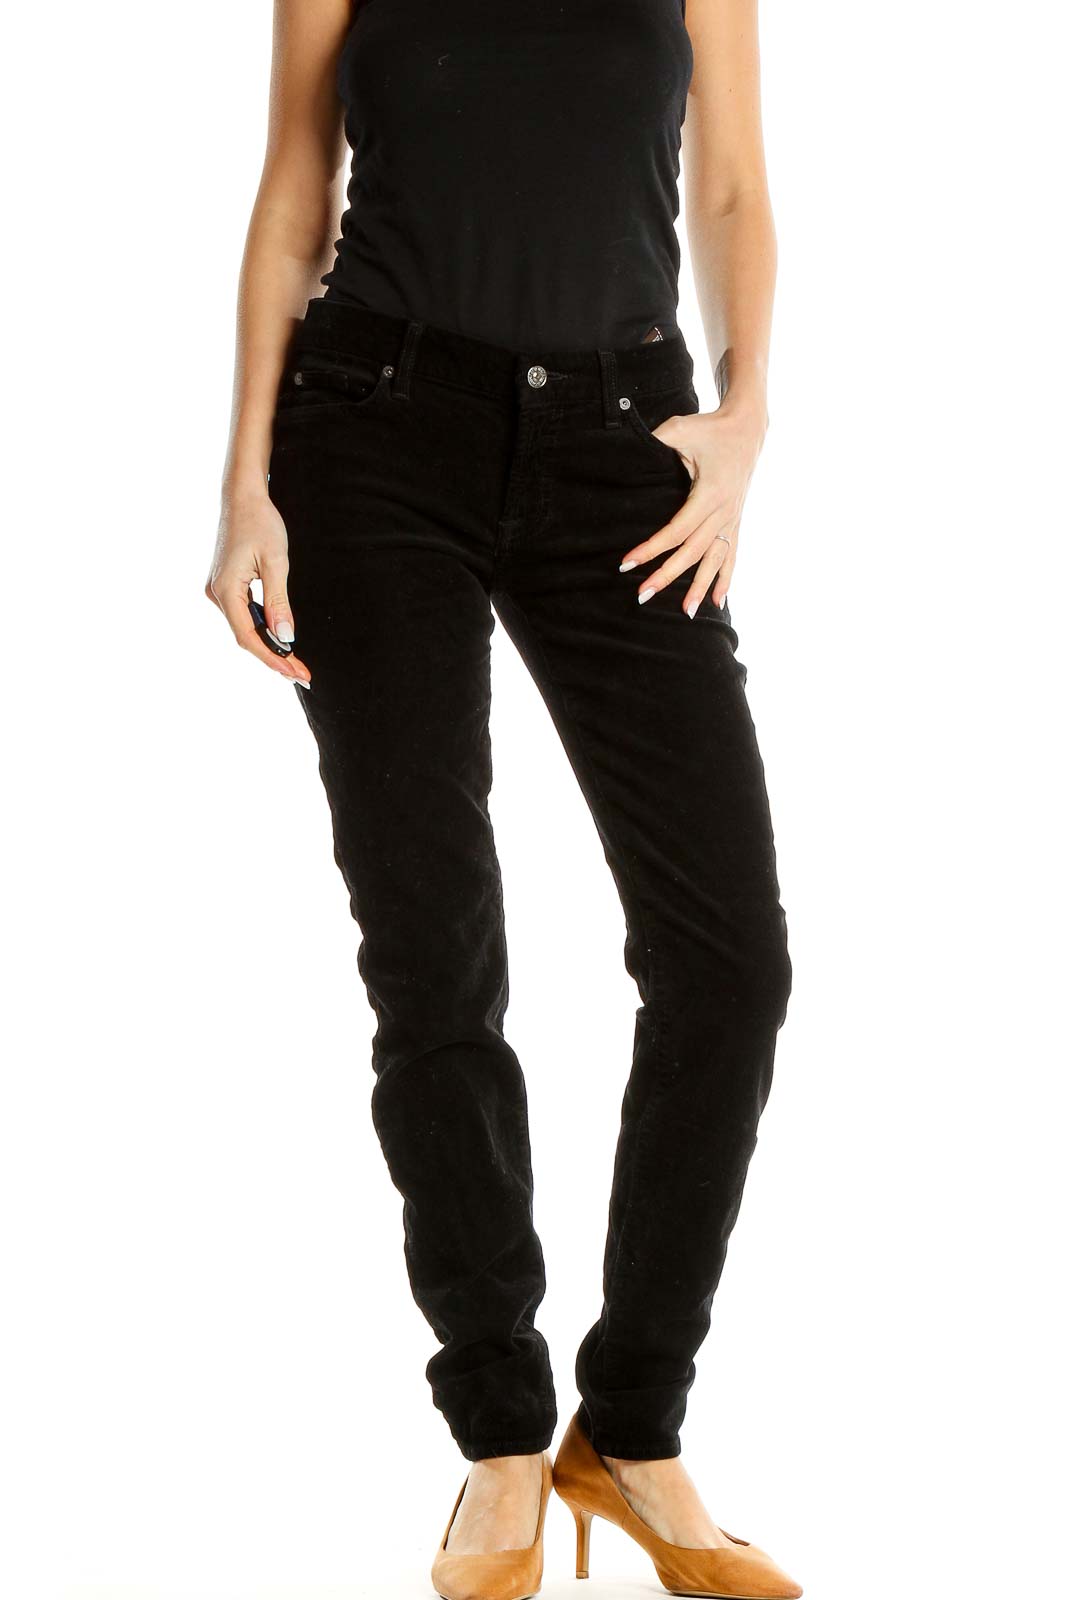 Black Low-Waisted Textured Jeans Front